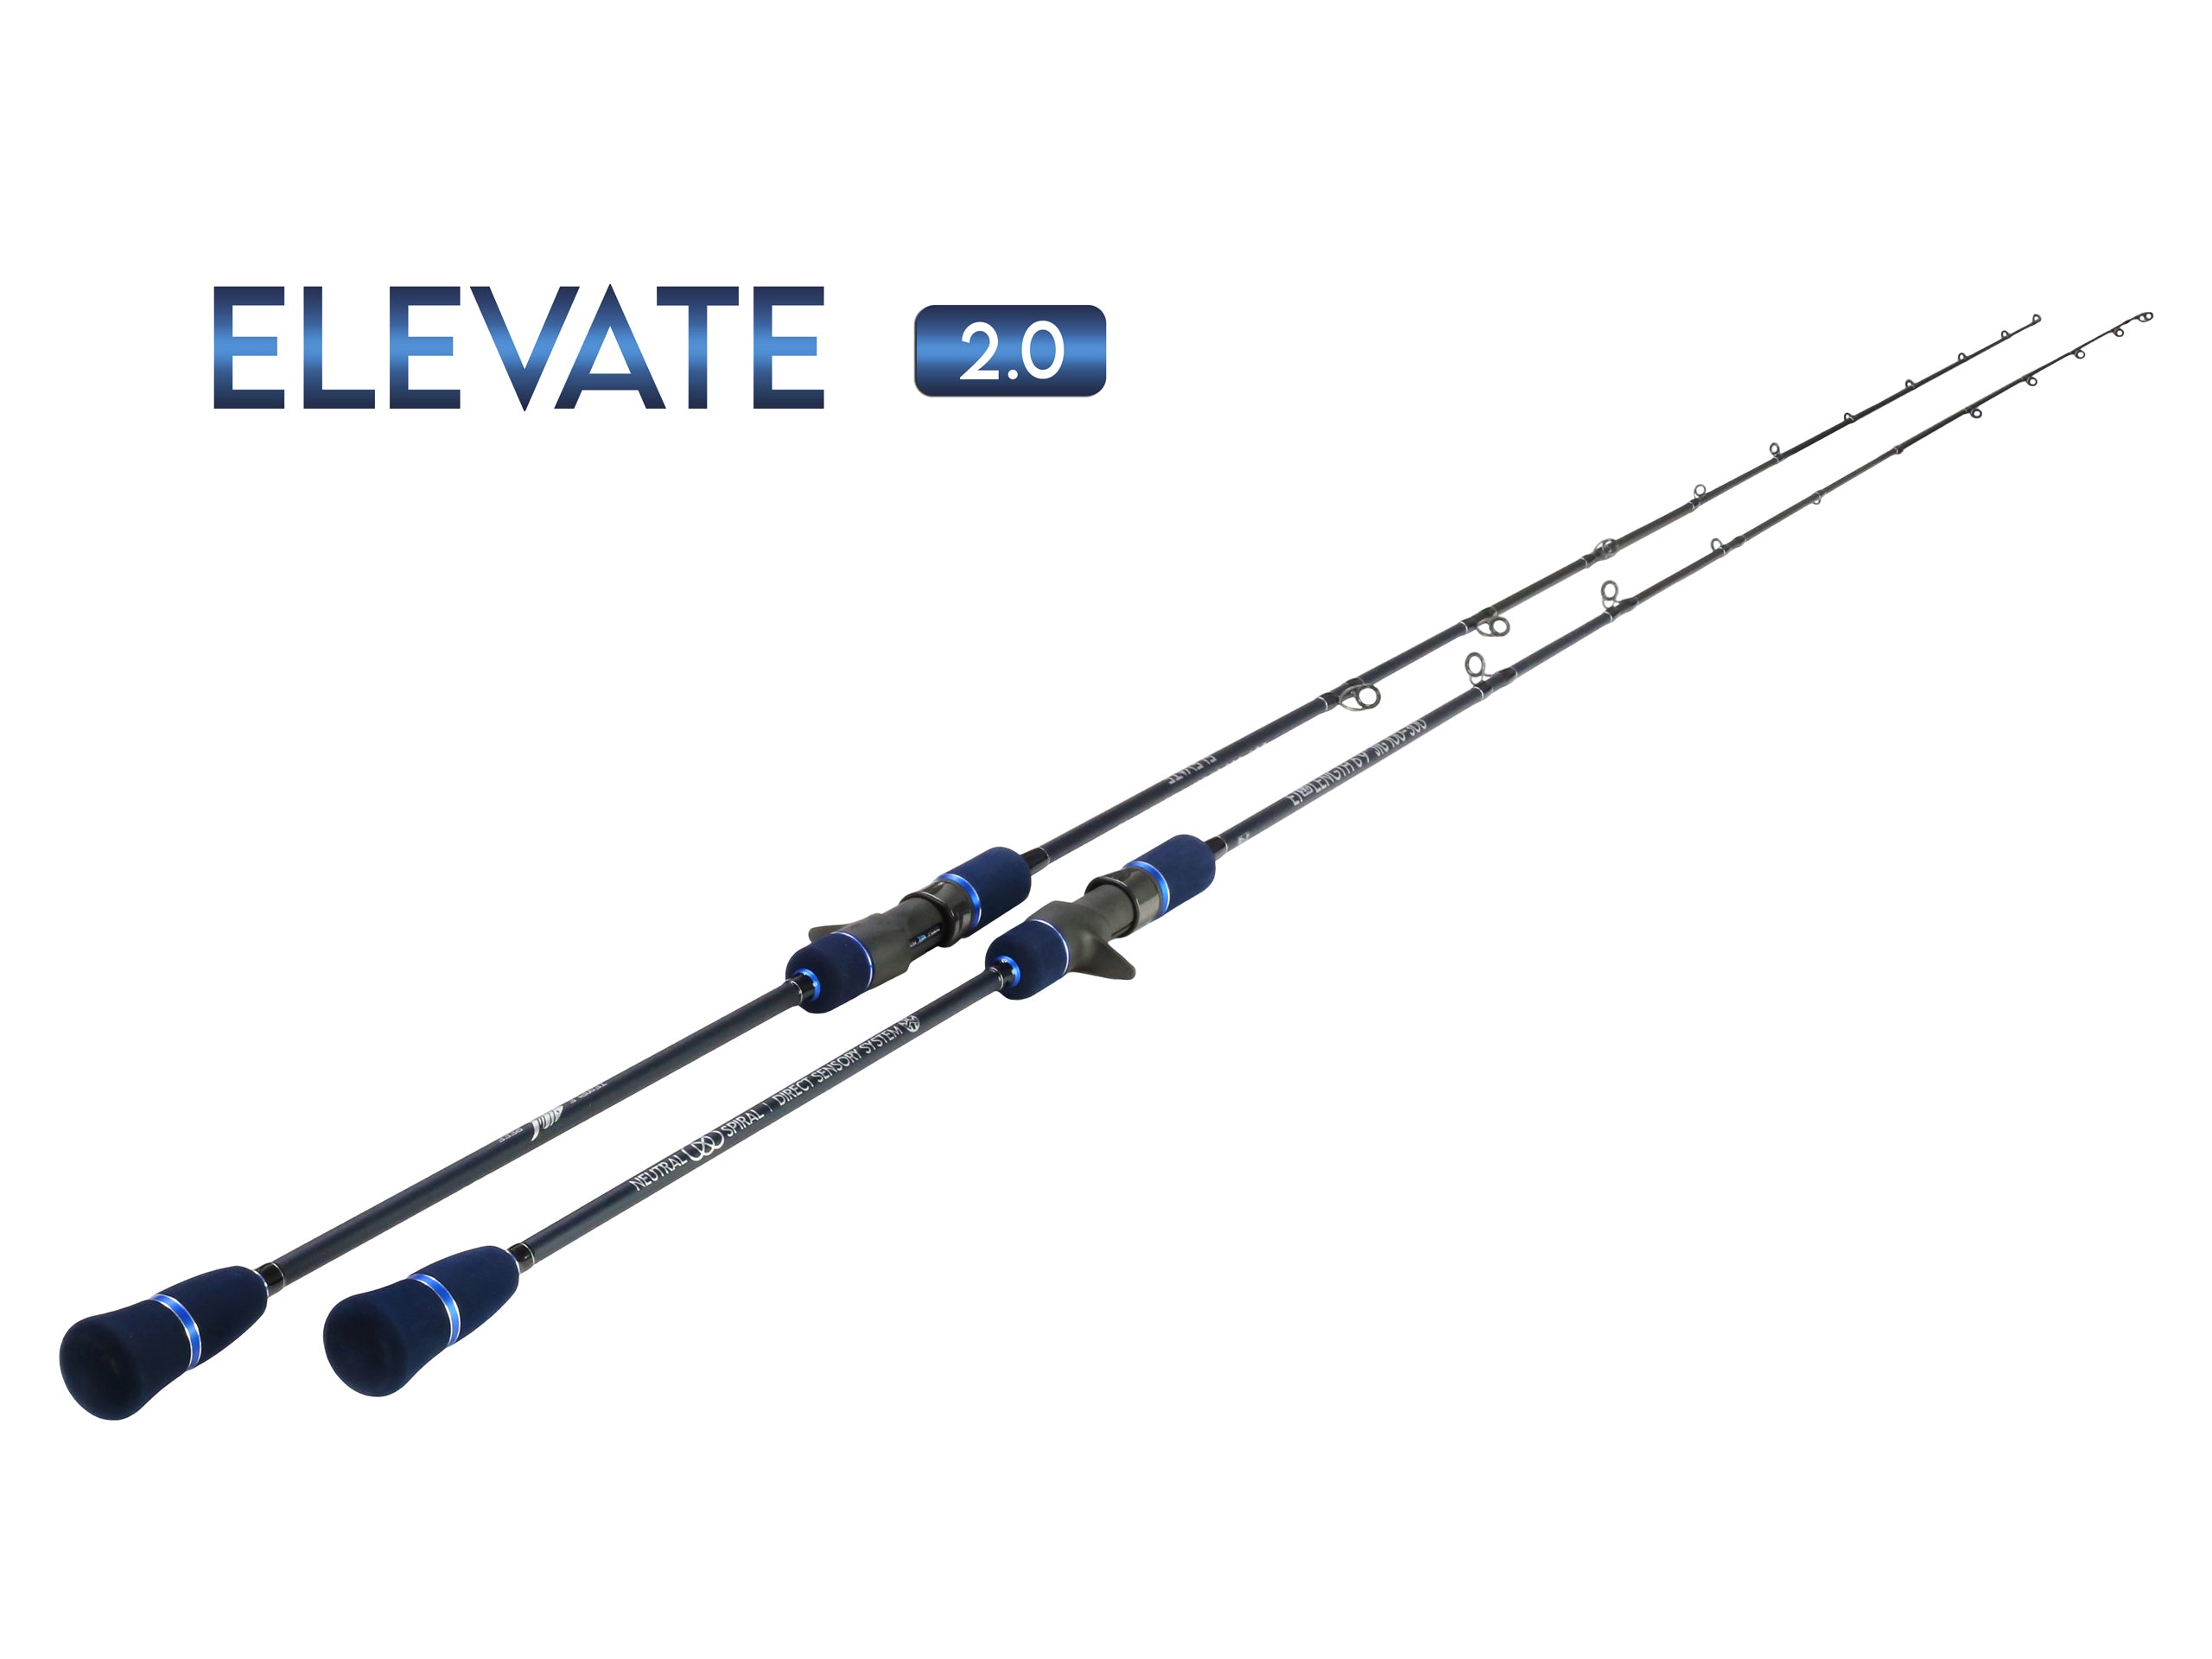 Slow Pitch Jigging Rod - Temple Reef - ELEVATE 2.0 – The